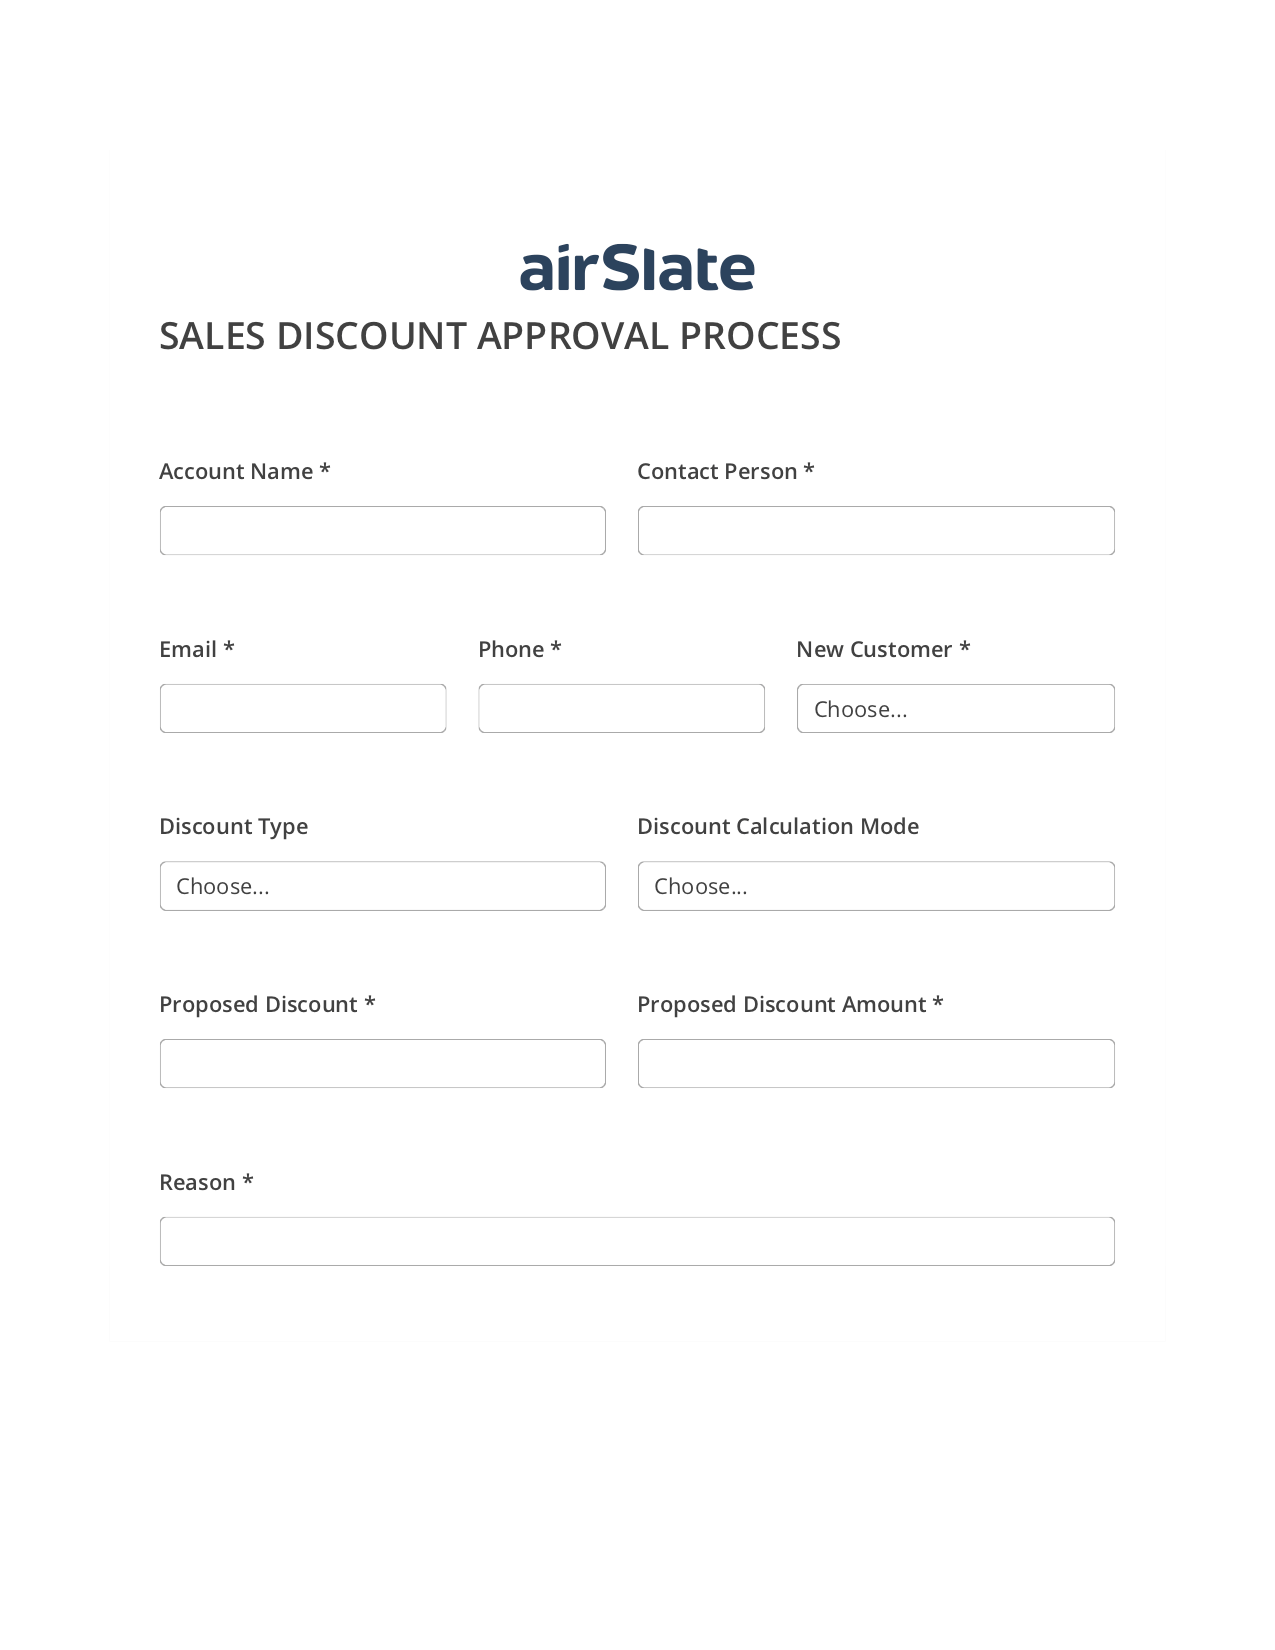 Sales Discount Approval Flow Export to Formstack Documents Bot